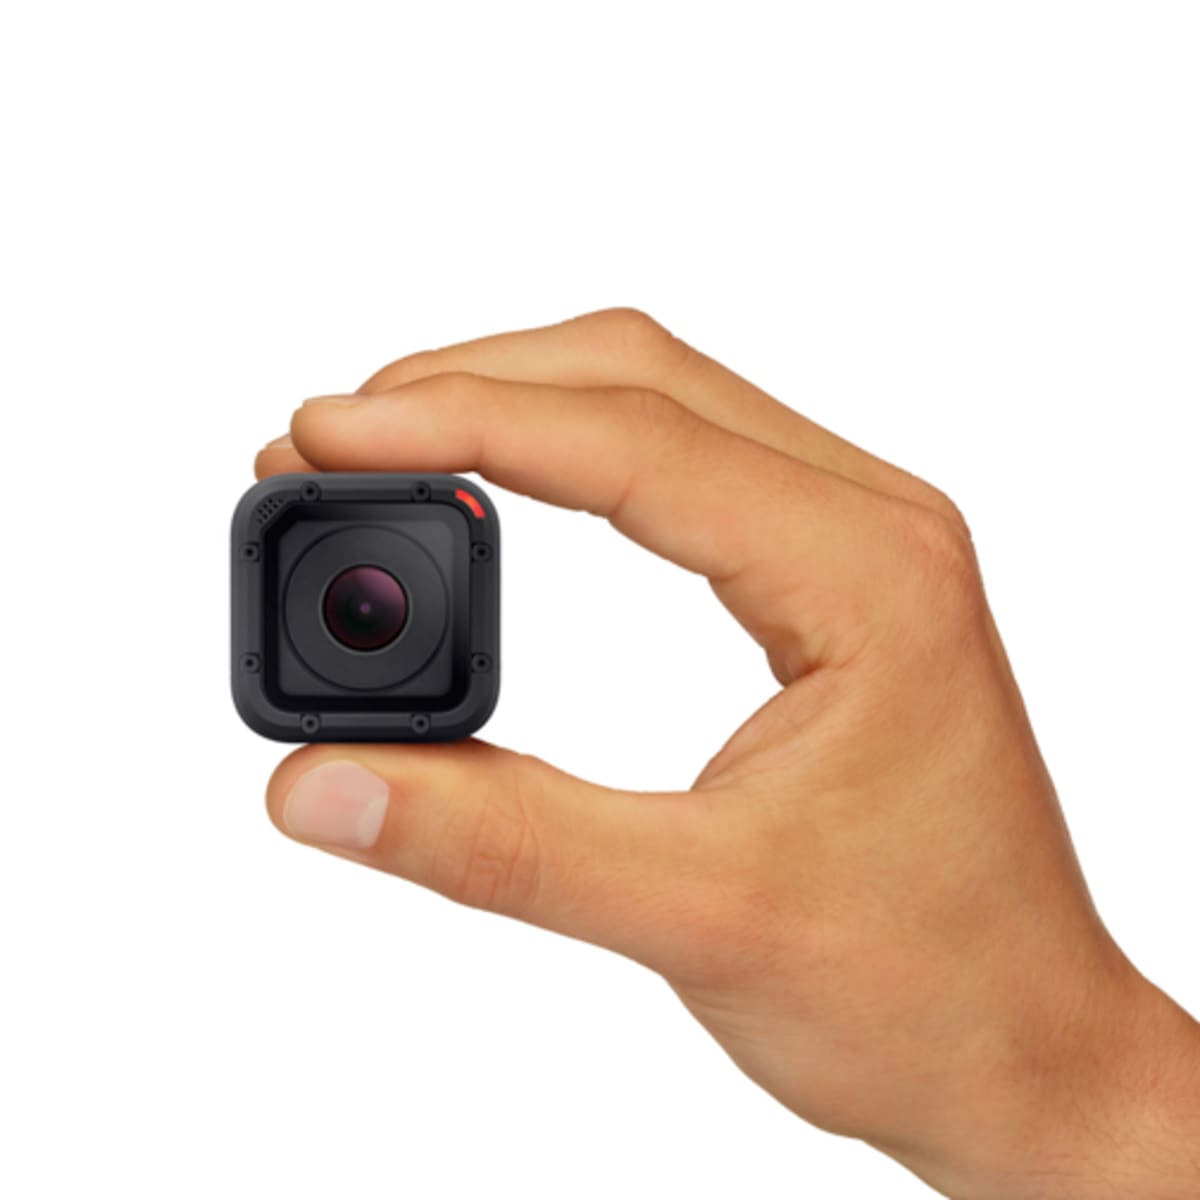 First Look: GoPro HERO4 Session - BikeMag